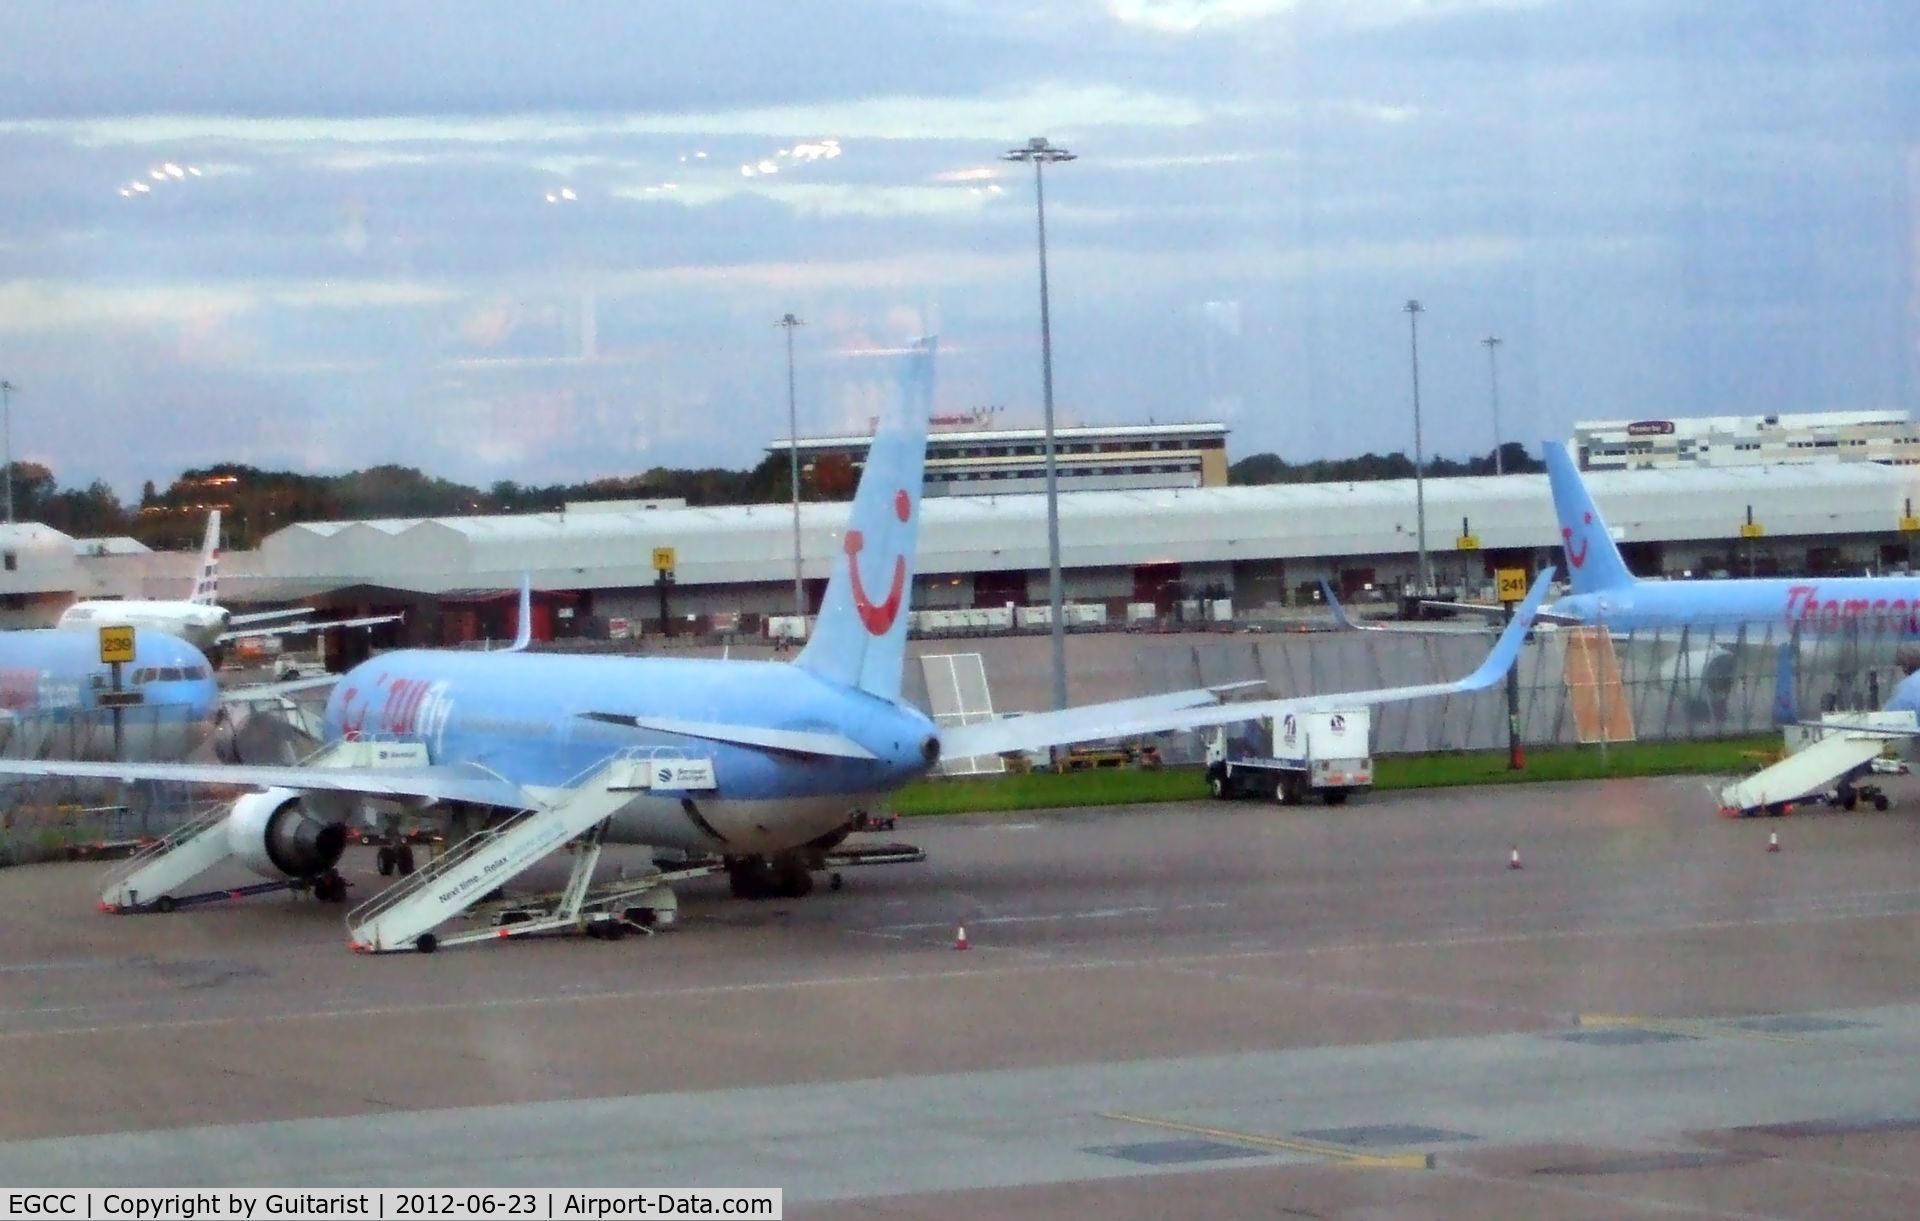 Manchester Airport, Manchester, England United Kingdom (EGCC) - Out of the windows of T2 again